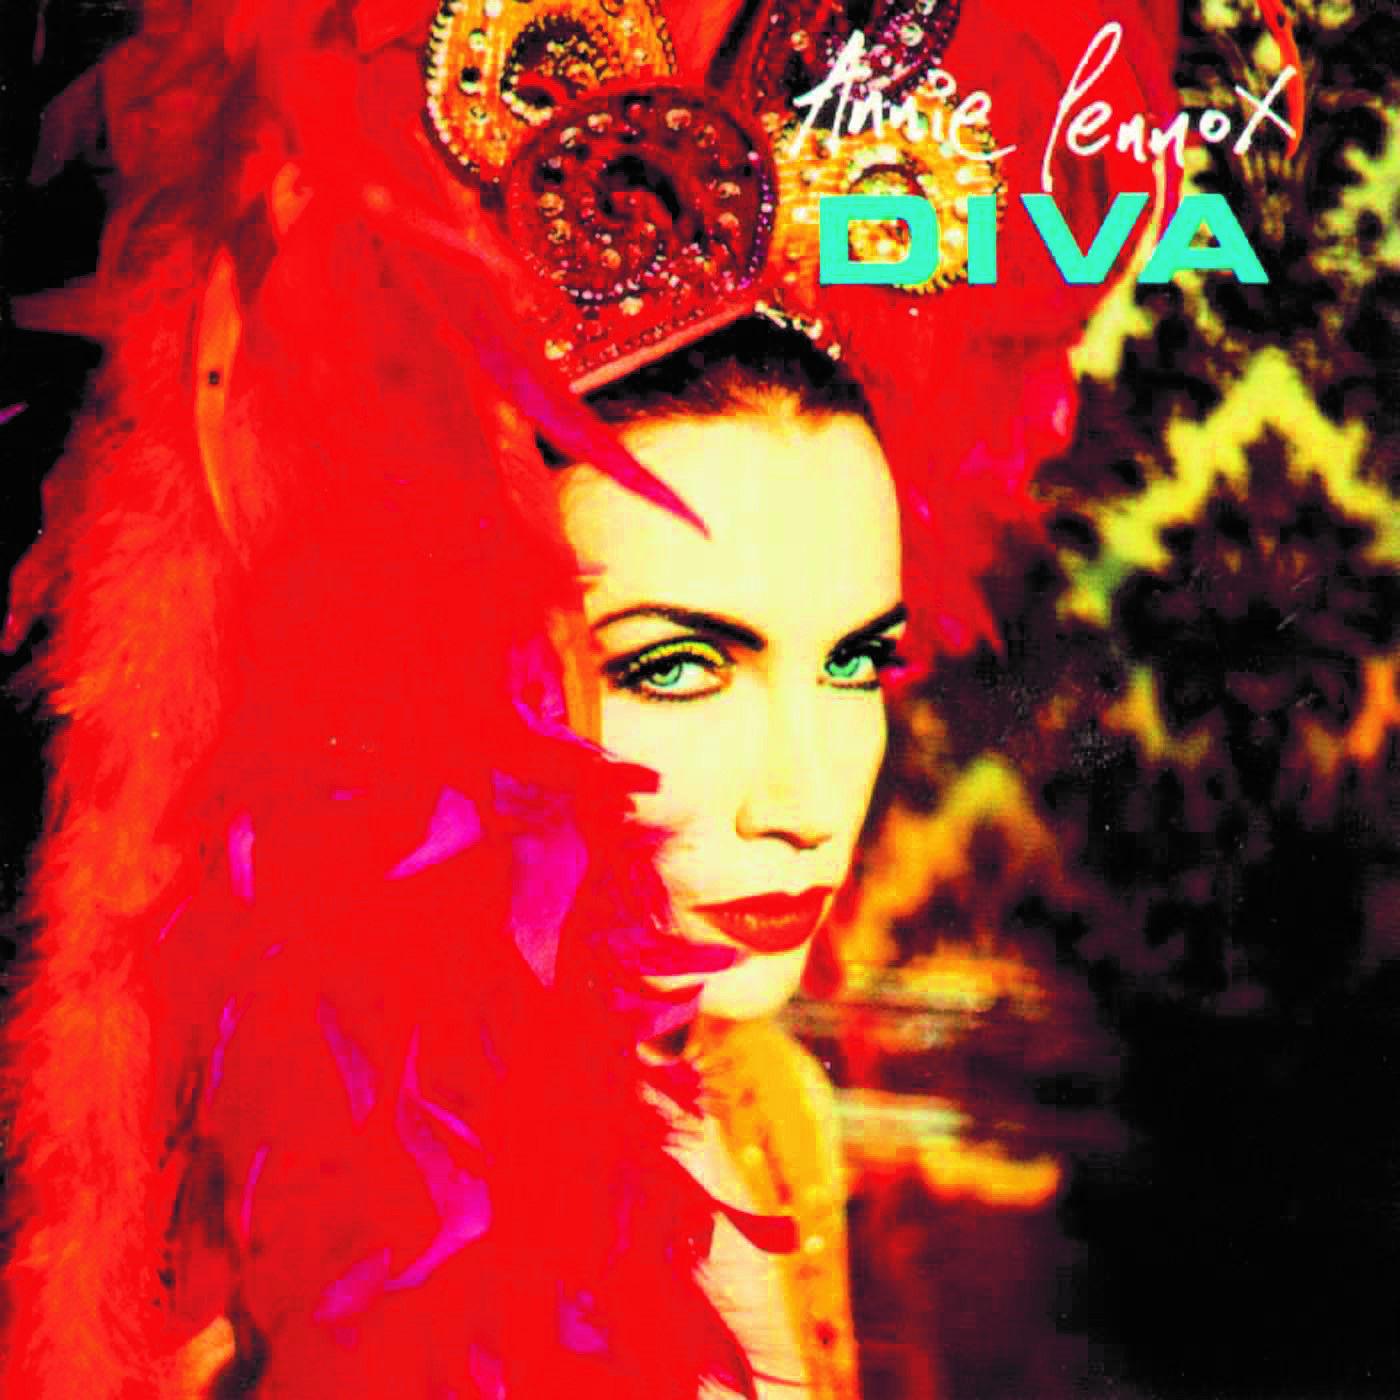 ‘Diva’, the debut solo album by Lennox, released in 1992, entered the UK album chart at number one